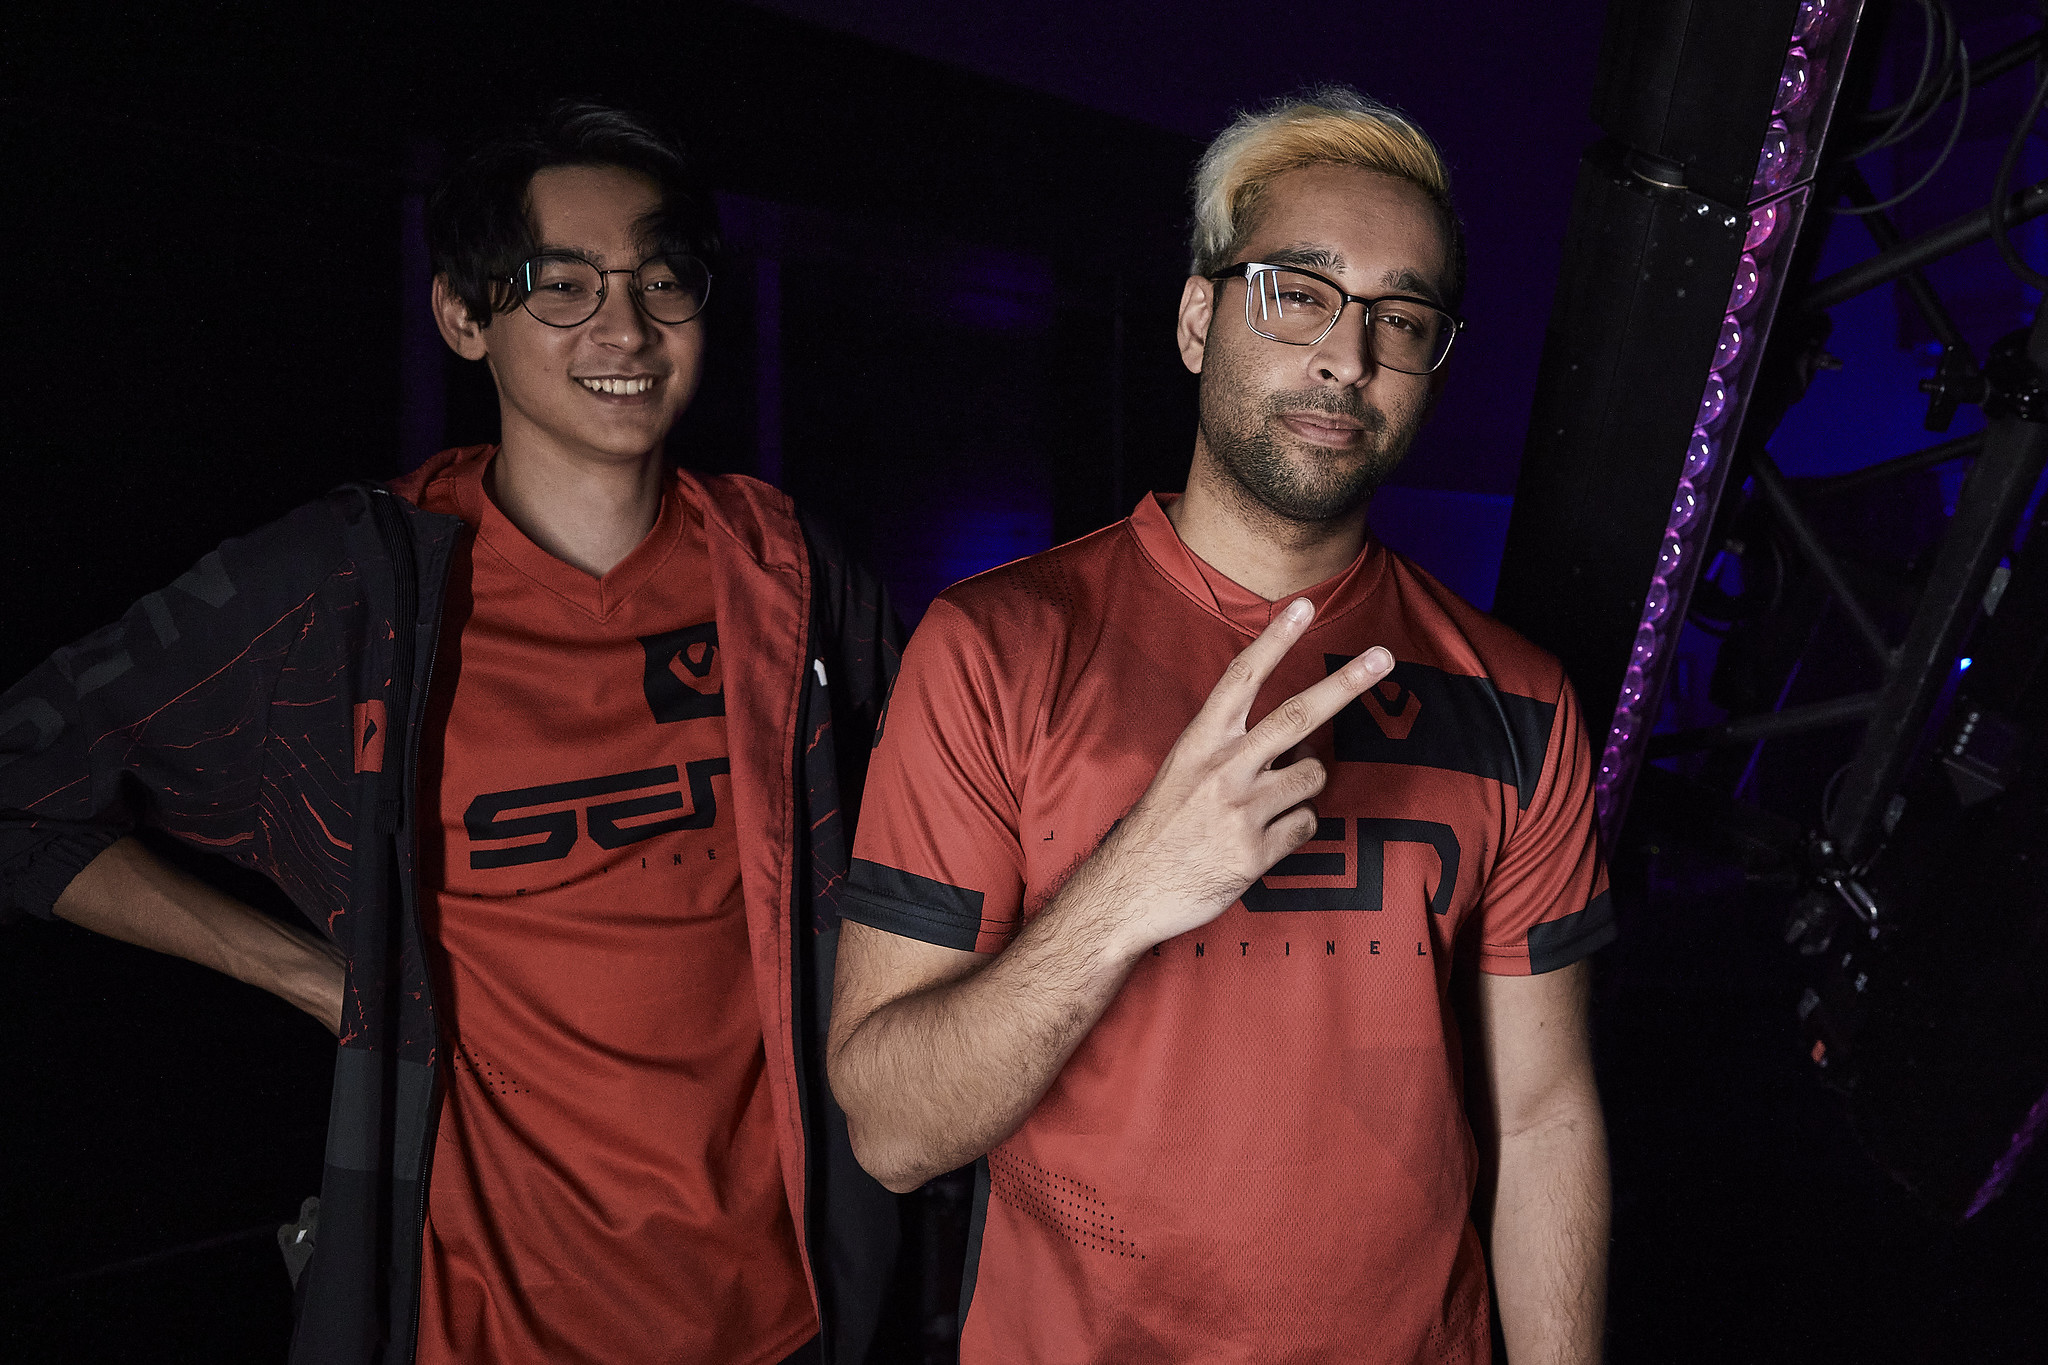 TenZ and ShahZaM, players for Sentinels